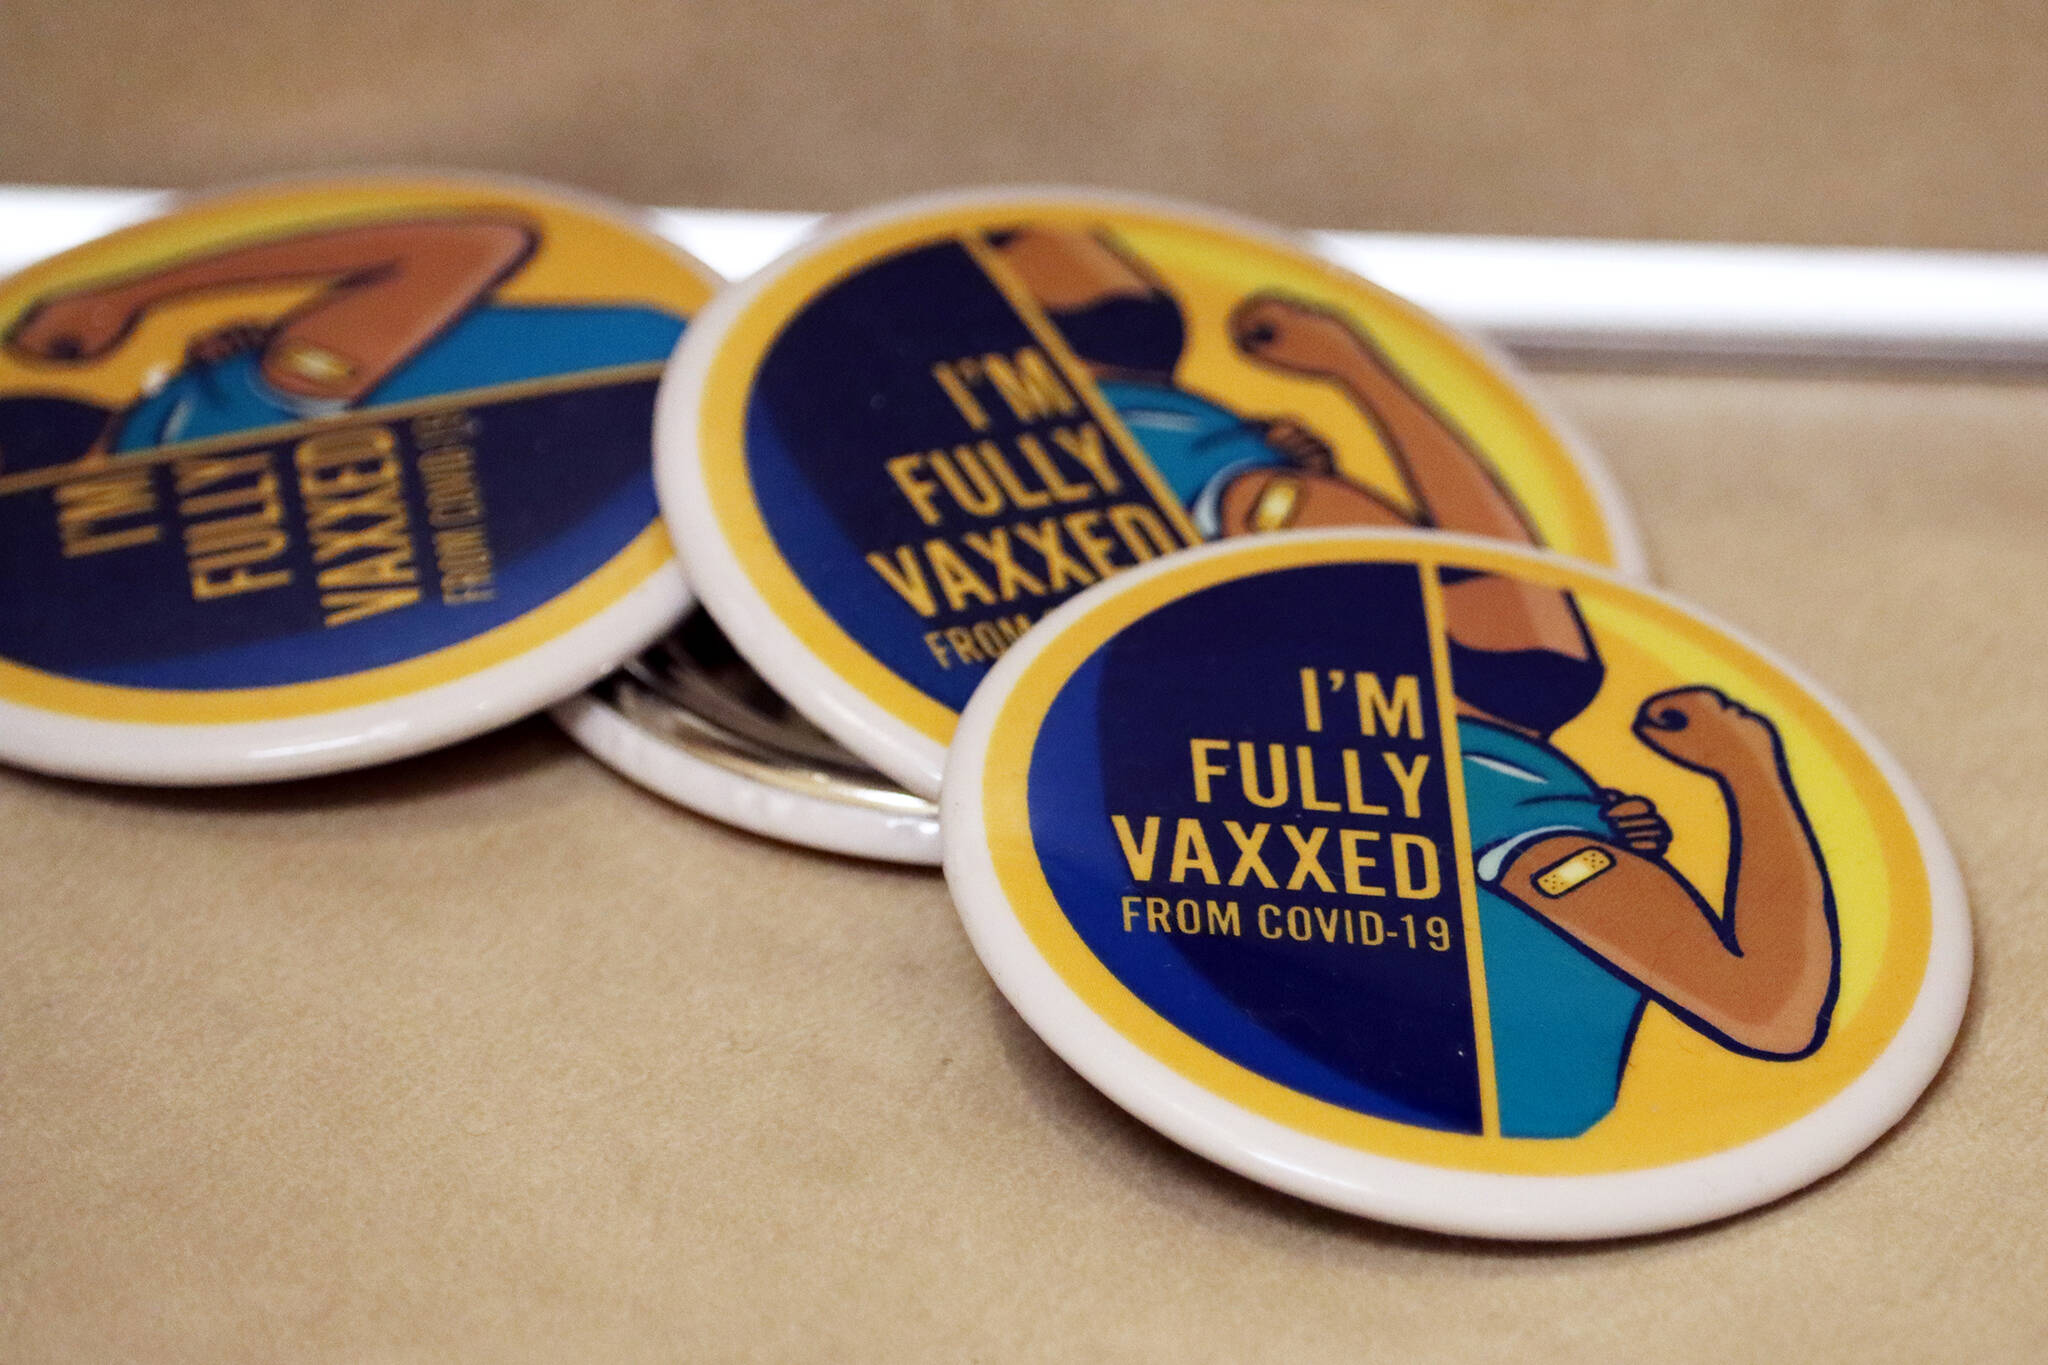 "I'm full vaxxed from COVID," read buttons at the Juneau Public Health Center in late November. Juneau's relatively high vaccination rate plays a role in the local response to the ongoing pandemic. At Monday night’s Committee of the Whole meeting, City Assembly members agreed to move a step closer to “modest relaxations” to the city’s COVID-19 mitigation strategies and heard from state experts who praised Juneau’s performance in keeping the worst at bay so far. (Ben Hohenstatt / Juneau Empire)